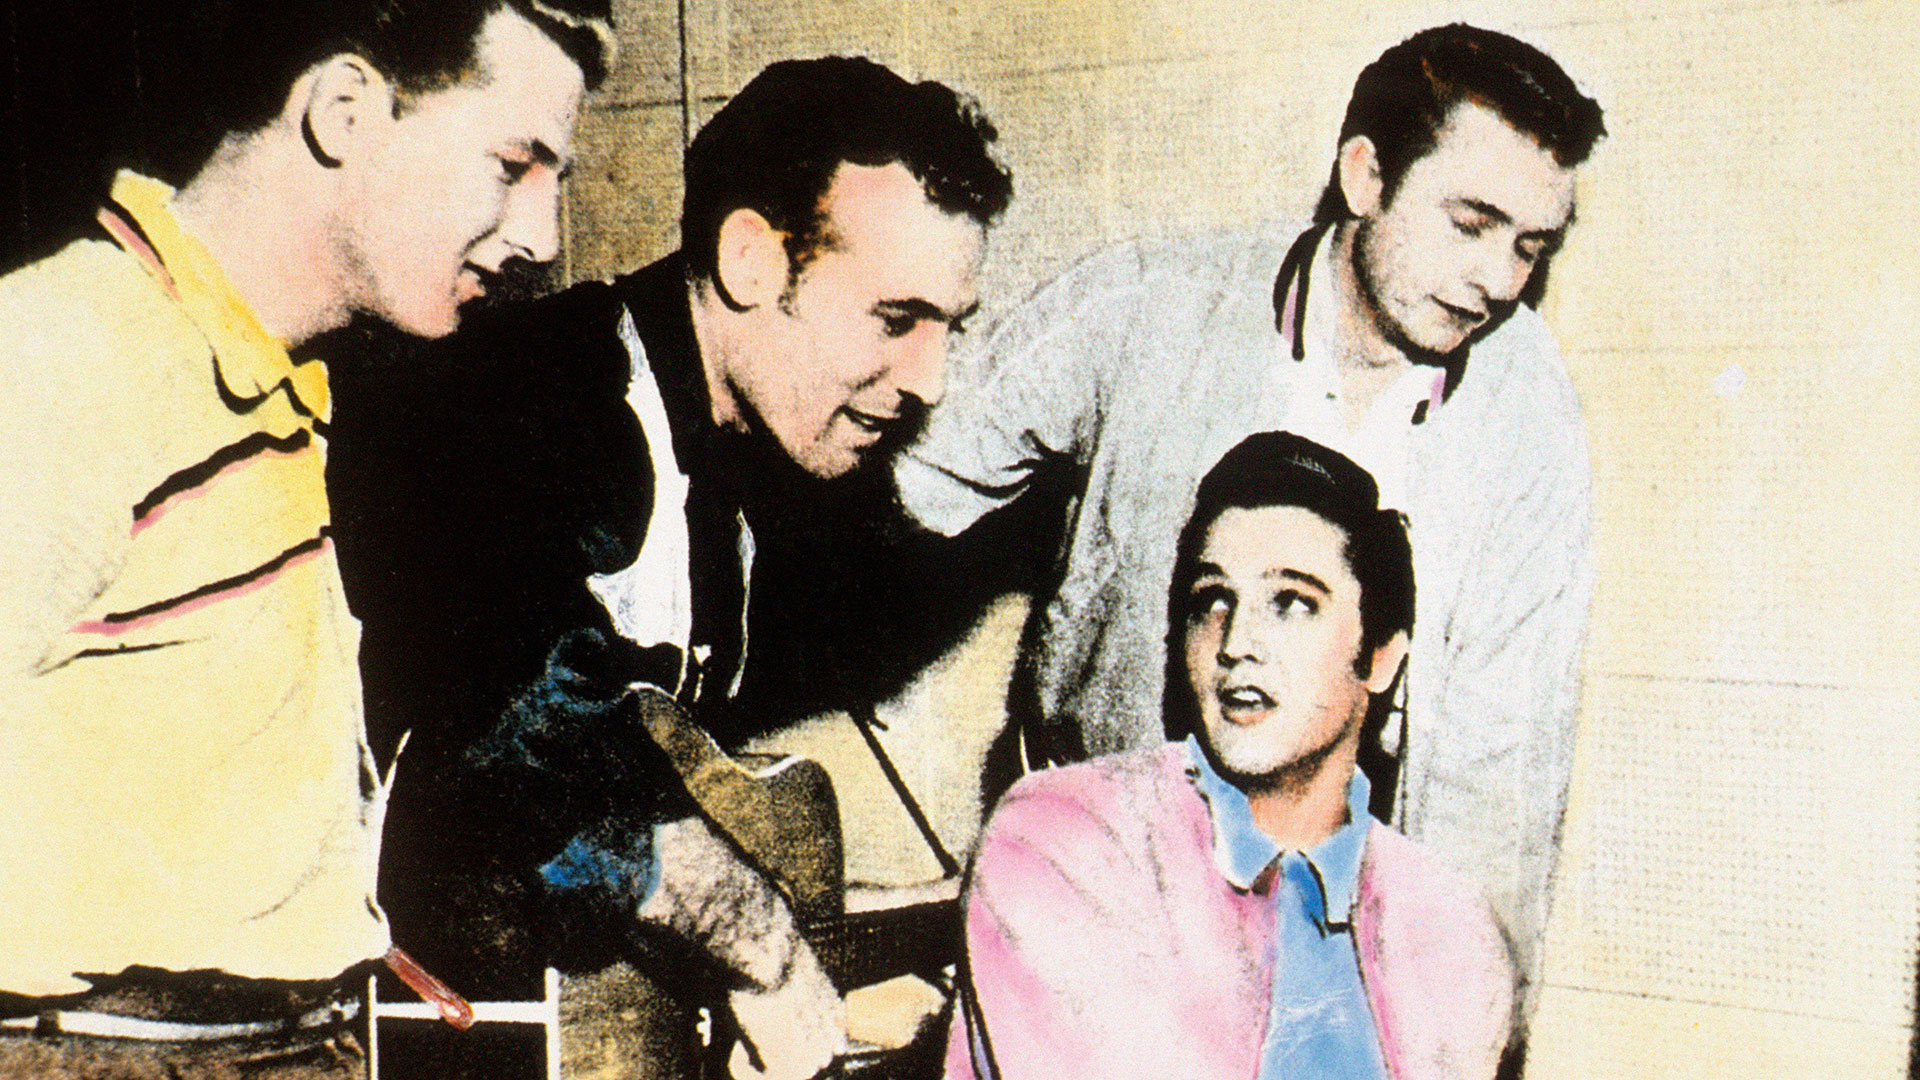 UNSPECIFIED - DECEMBER 04: (AUSTRALIA OUT) Photo of Elvis PRESLEY and Jerry Lee LEWIS and Carl PERKINS and Johnny CASH;  LR Jerry Lee Lewis, Carl Perkins, Elvis Presley (sitting), Johnny Cash - The Million Dollar Quartet - group shot at Sun Studios (Photo by GAB Archive/Redferns)